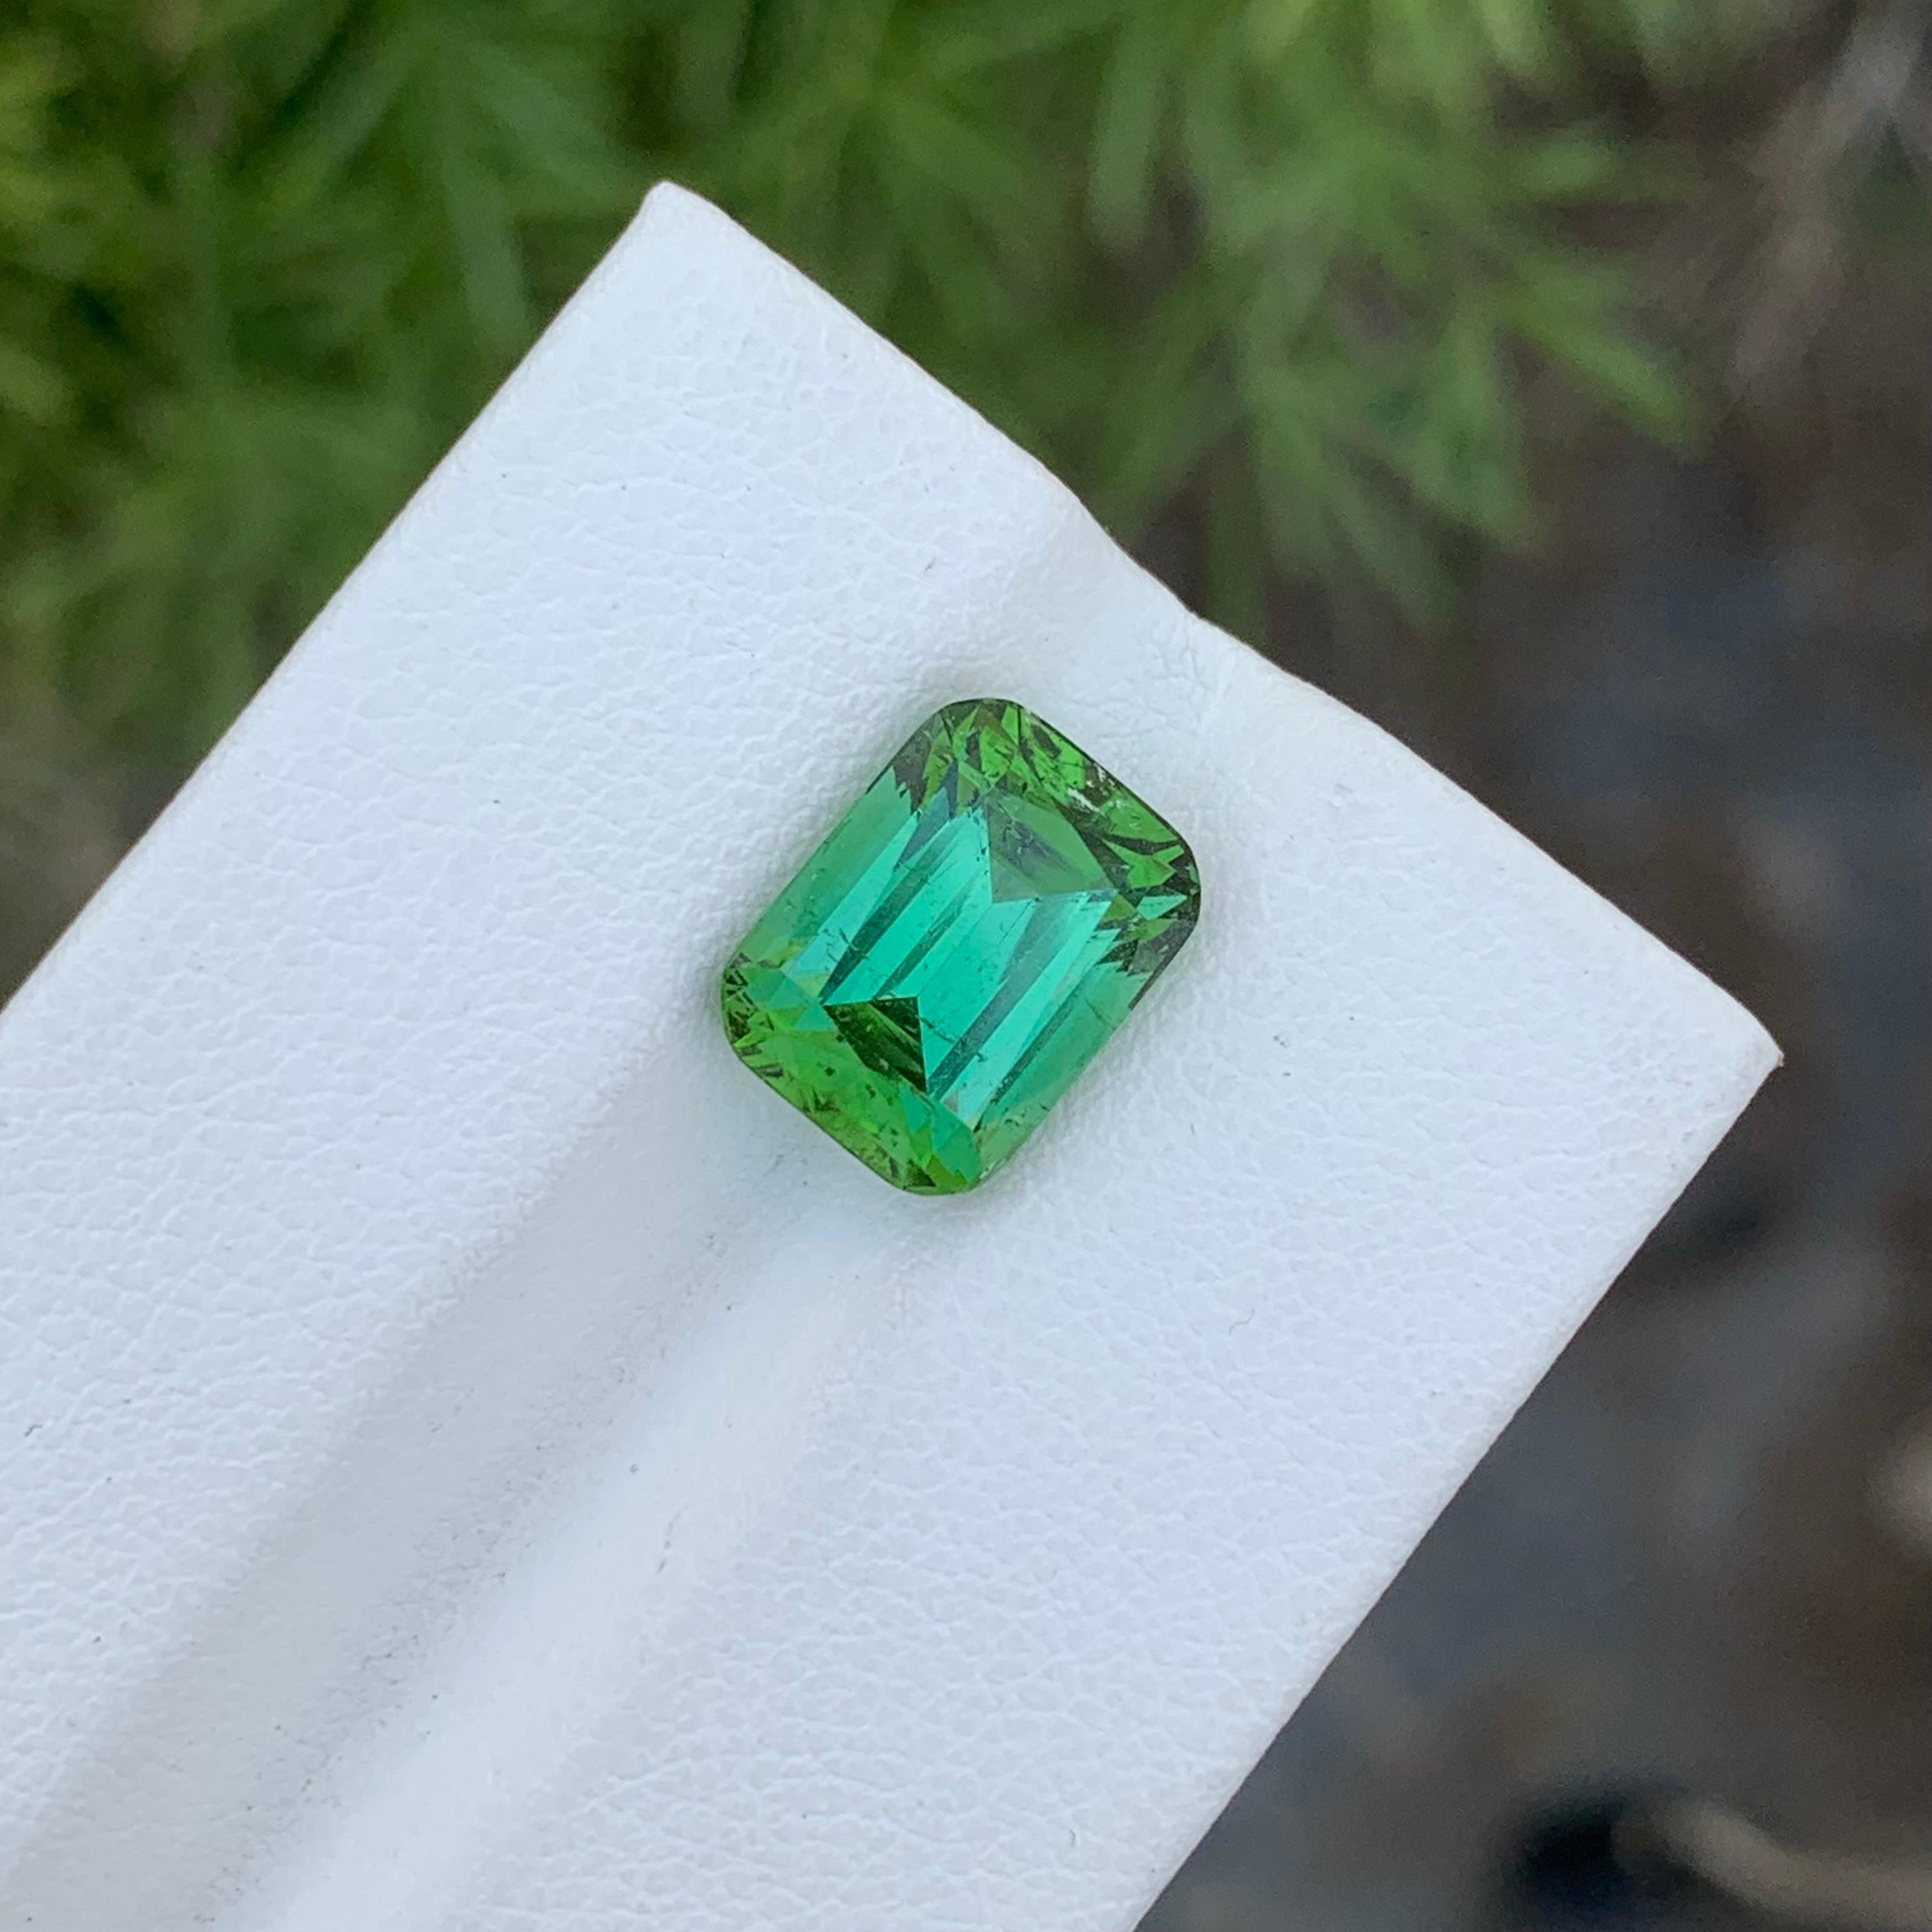 Loose Green Tourmaline
Weight: 5.00 Carats
Dimension: 10.7 x 8.1 x 7 Mm
Colour: Green
Origin: Afghanistan
Certificate: On Demand
Treatment: Non

Tourmaline is a captivating gemstone known for its remarkable variety of colors, making it a favorite